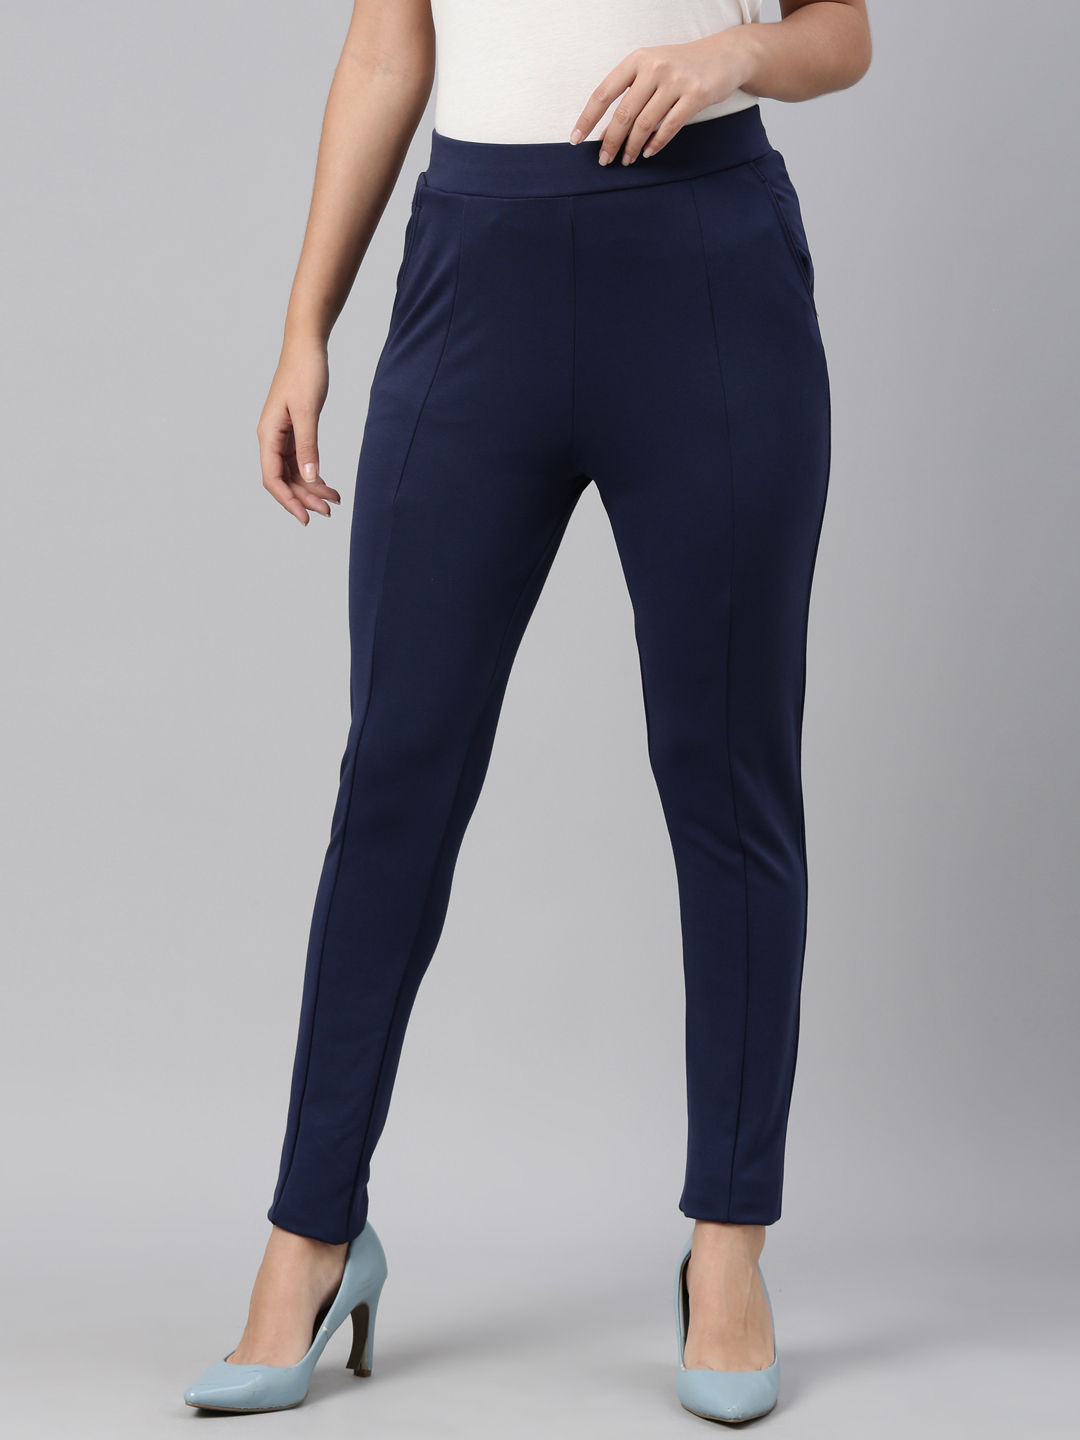 Buy Online Navy Blue Cotton Flax Pants for Women  Girls at Best Prices in  Biba IndiaBOTTOMW14918SS